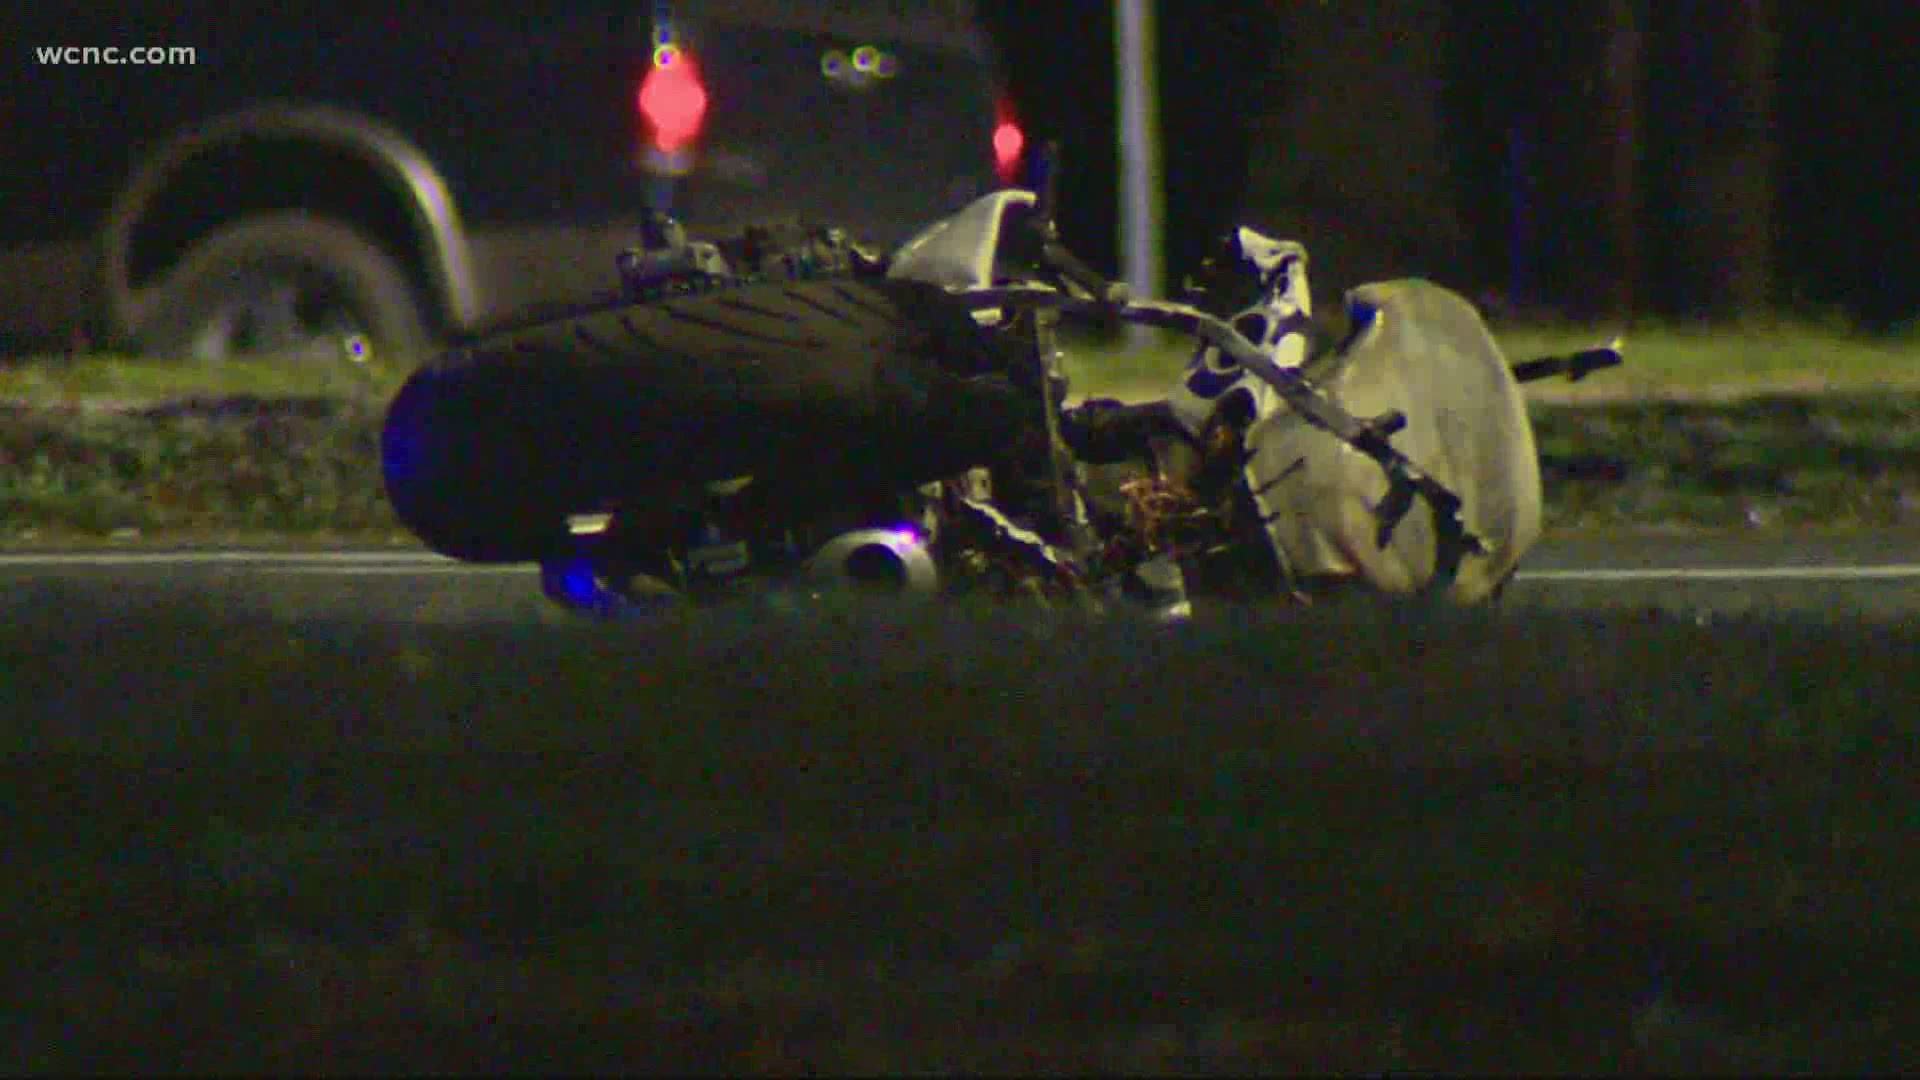 Charlotte-Mecklenburg Police Department responded to the crash near Albemarle Road and Nathanael Green Lane.